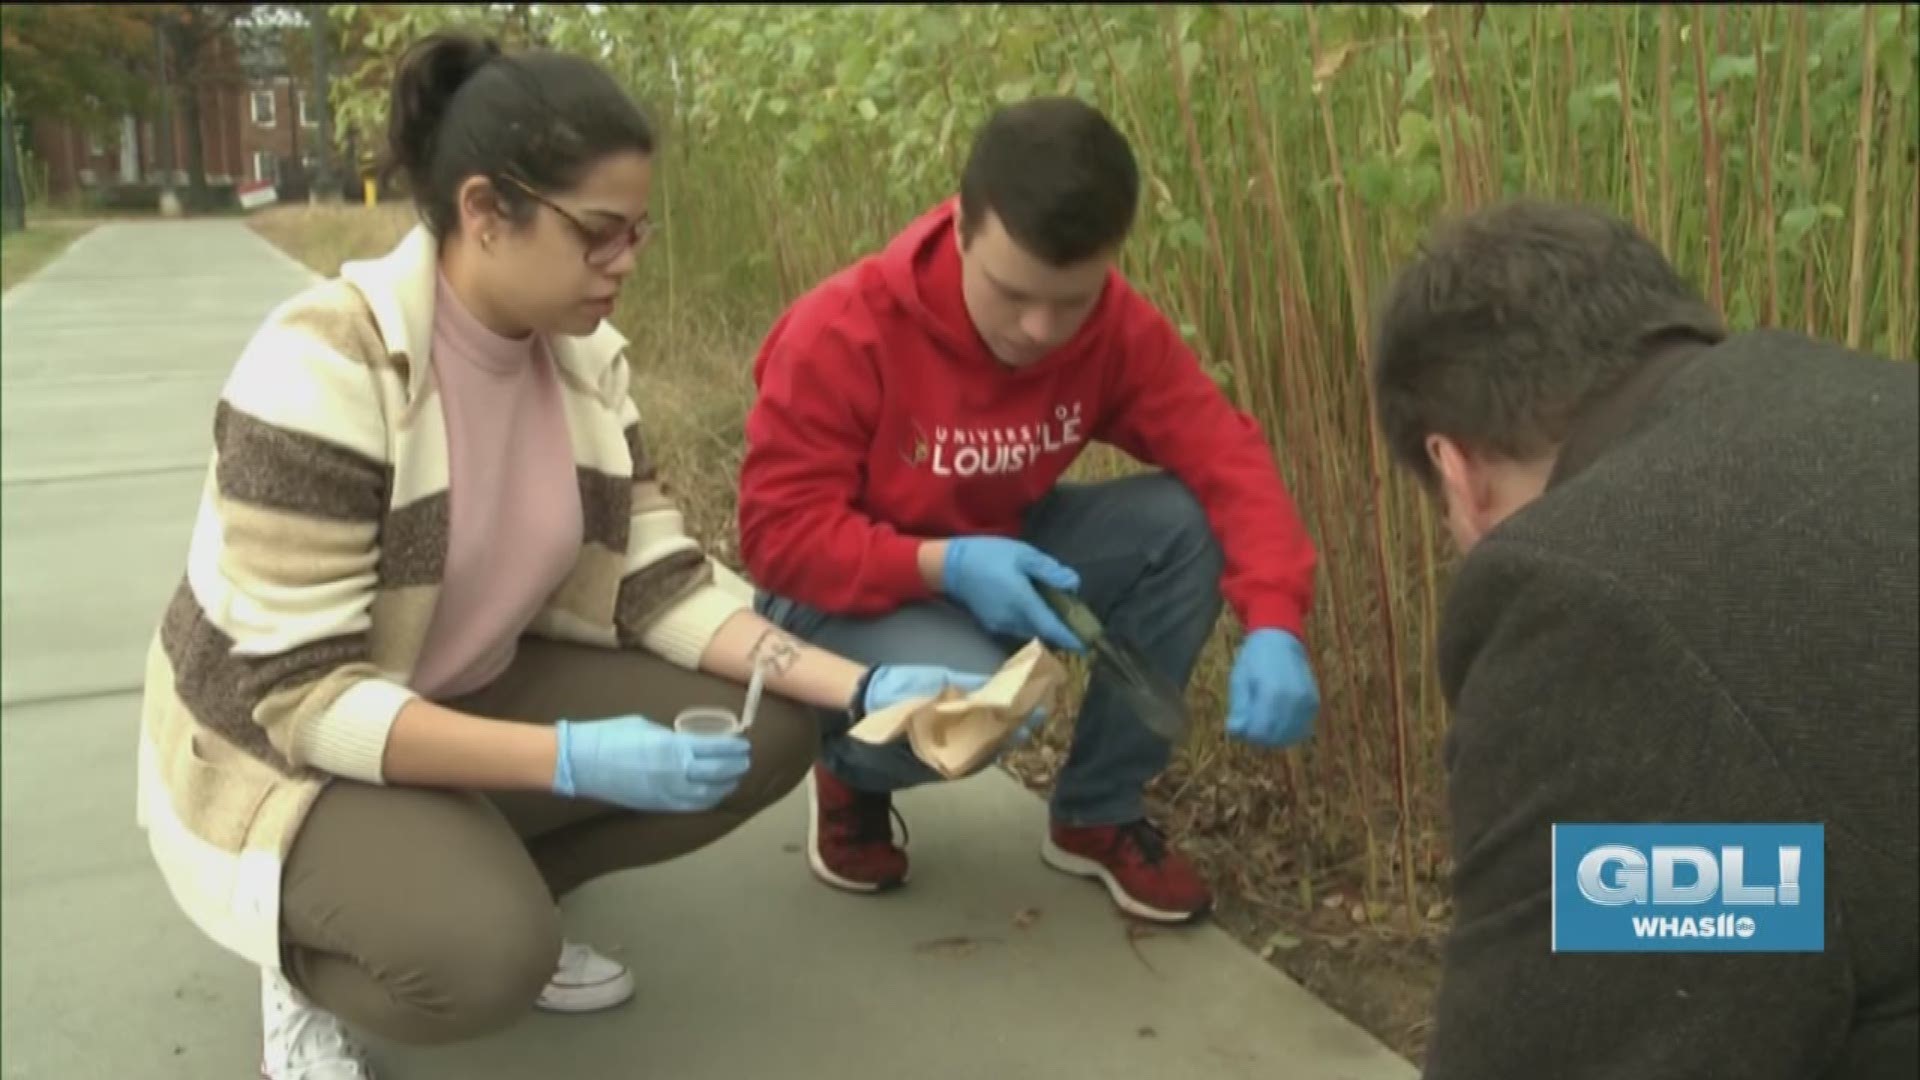 University of Louisville researchers and students  are getting their hands dirty trying to grow plants where they couldn't grow before.